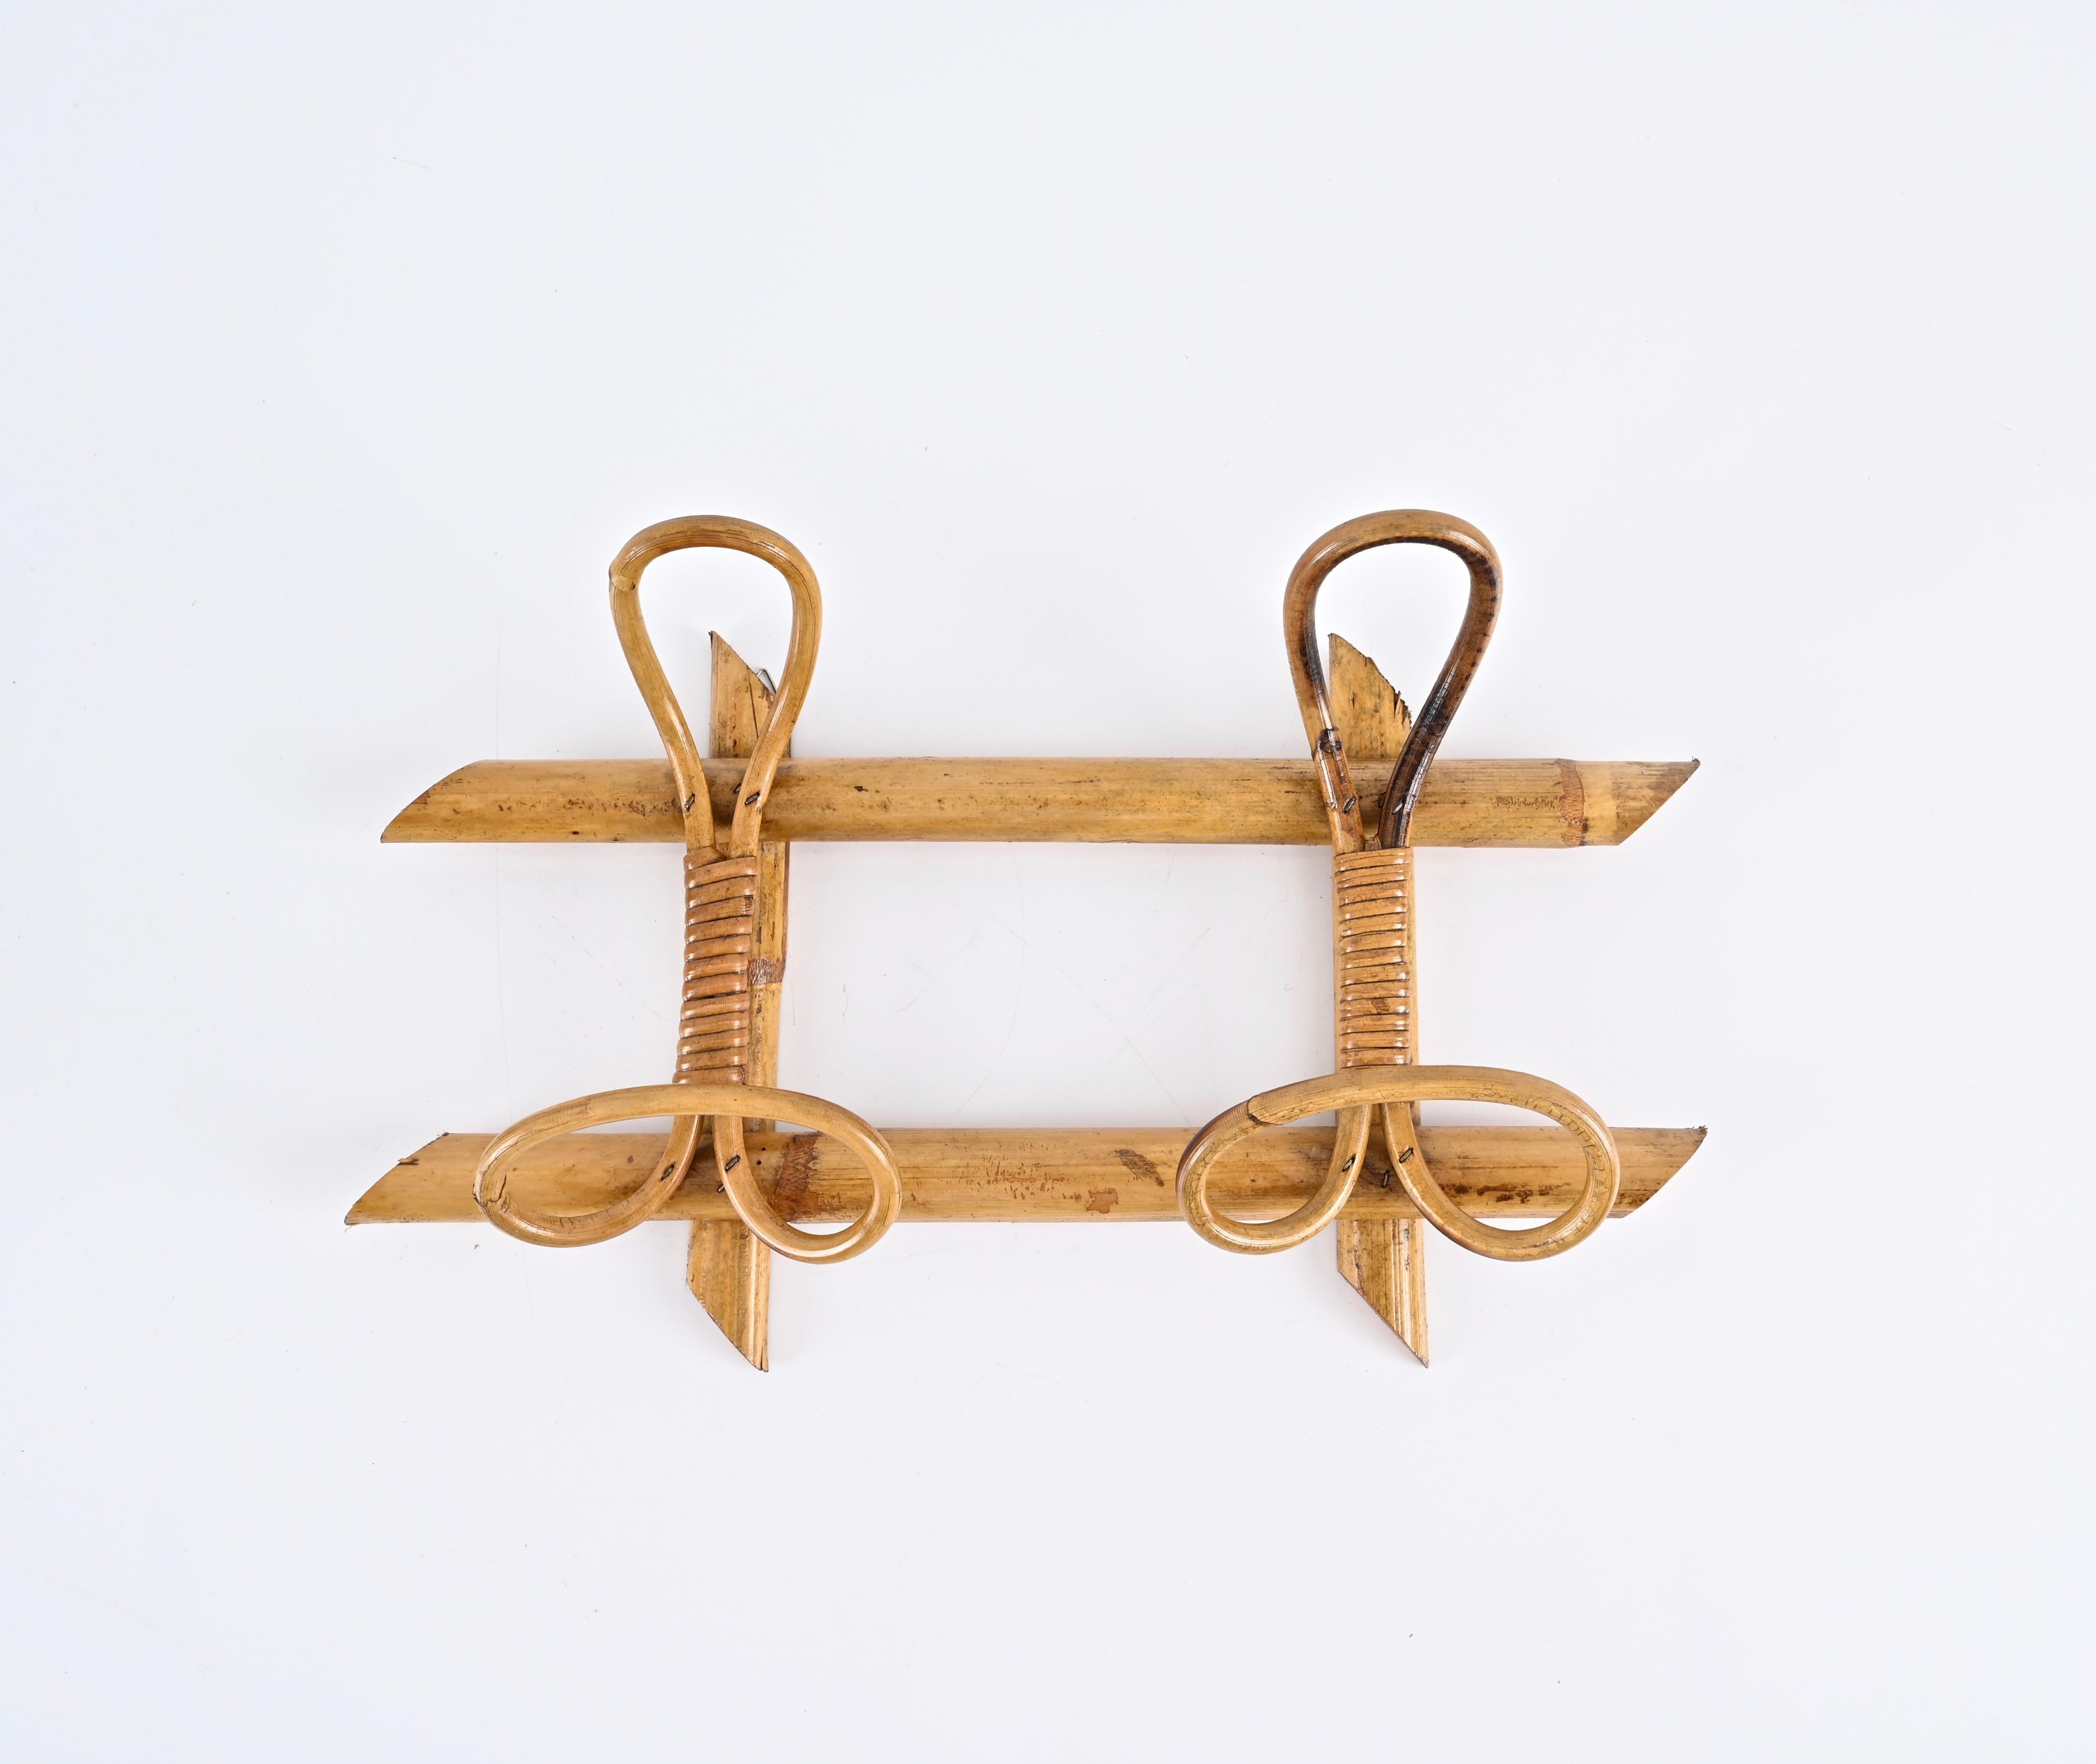 Hand-Crafted Midcentury French Riviera Coat Rack in Rattan, Wicker and Bamboo, Italy 1960s For Sale